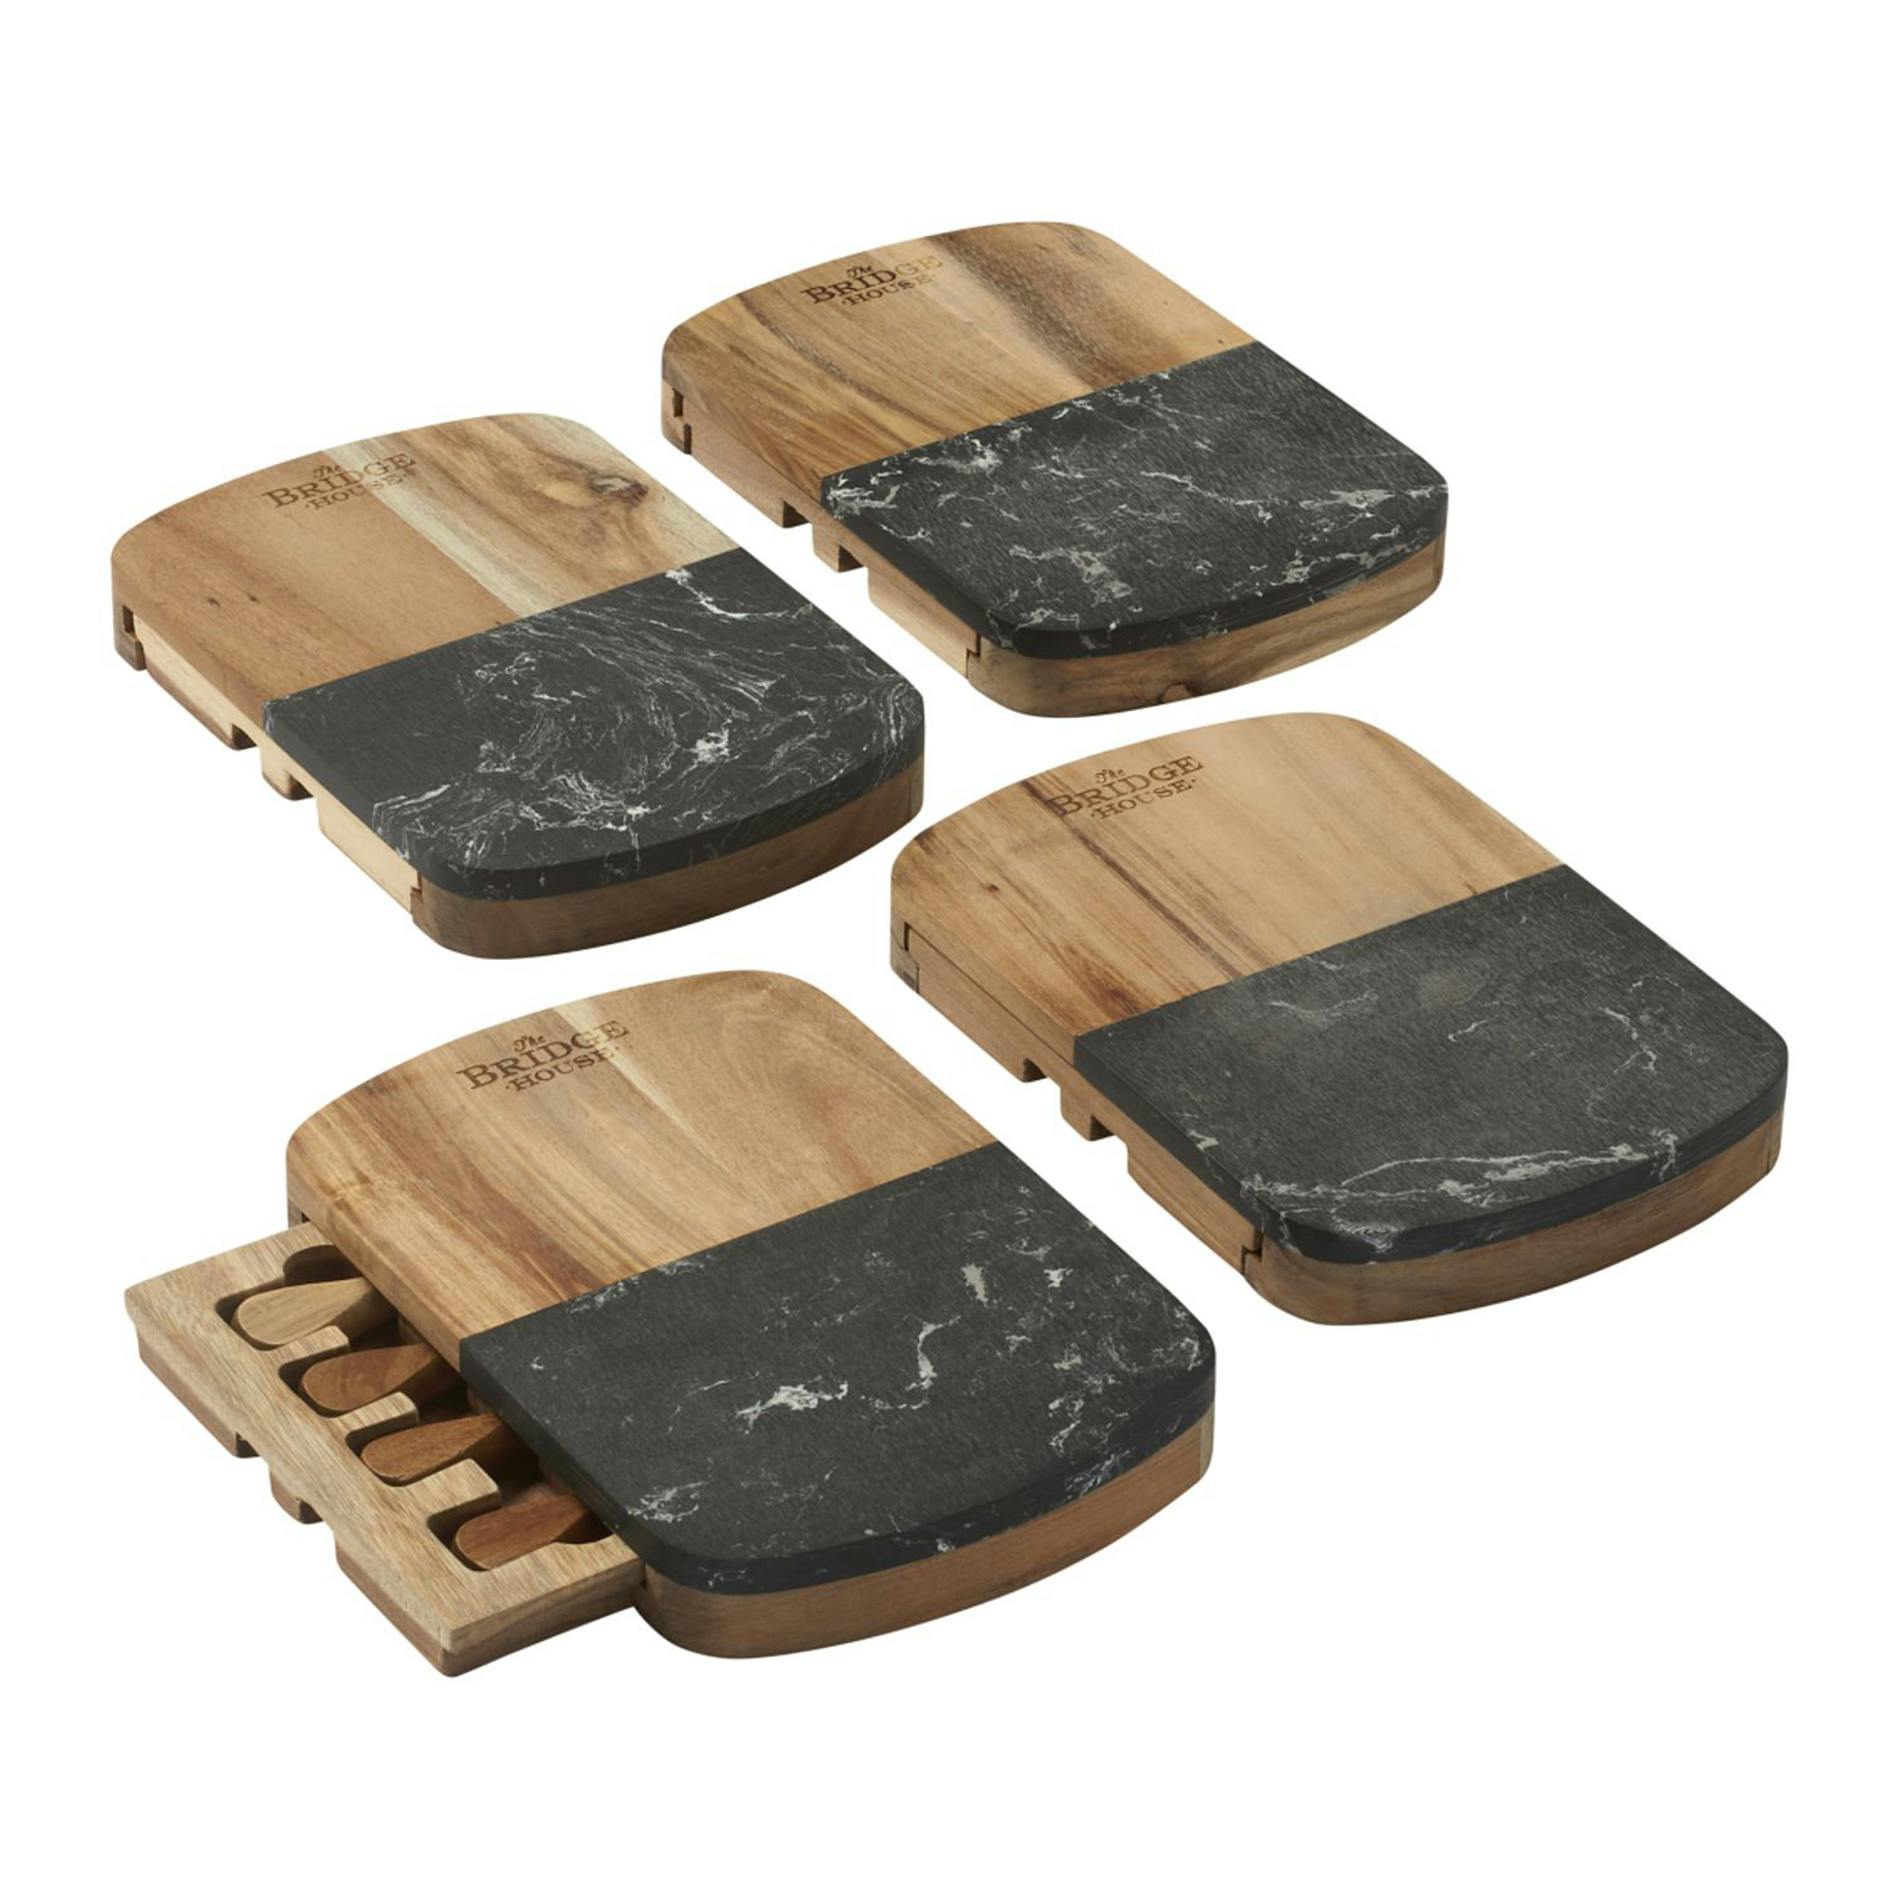 Black Marble Cheese Board Set with Knives - additional Image 3